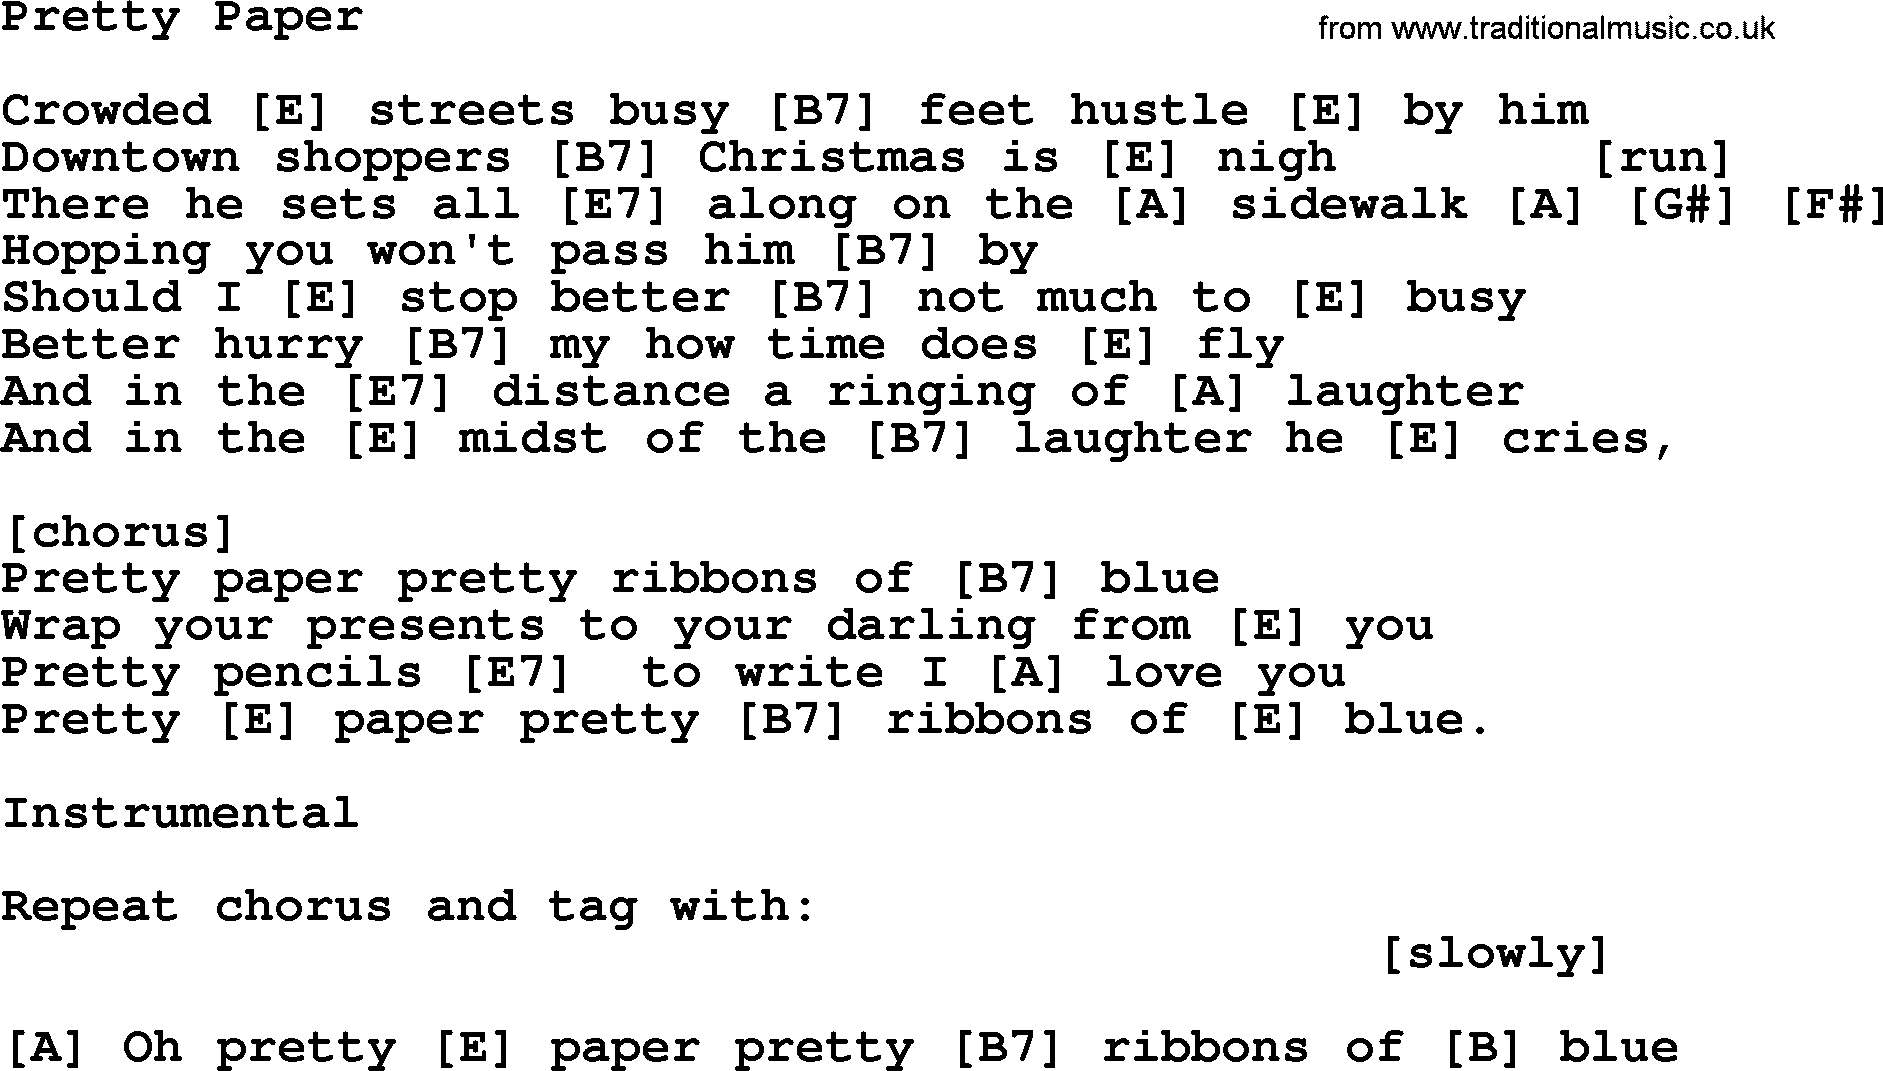 Willie Nelson song: Pretty Paper, lyrics and chords